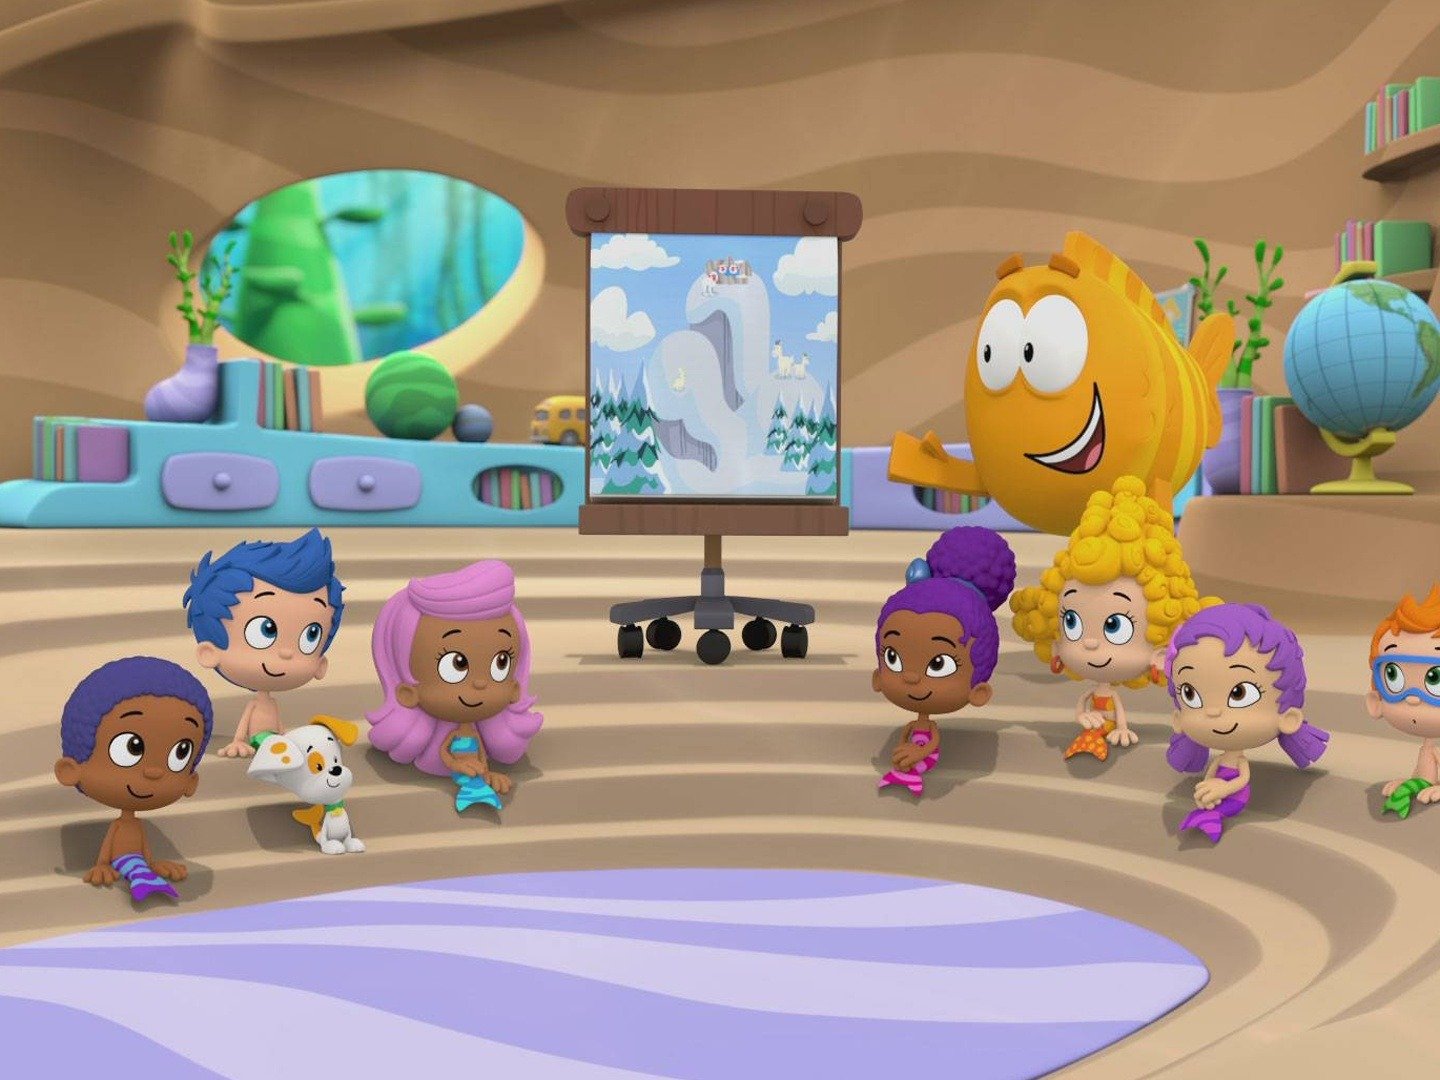 Bubble Guppies on TV Season 6 Episode 8 Channels and schedules